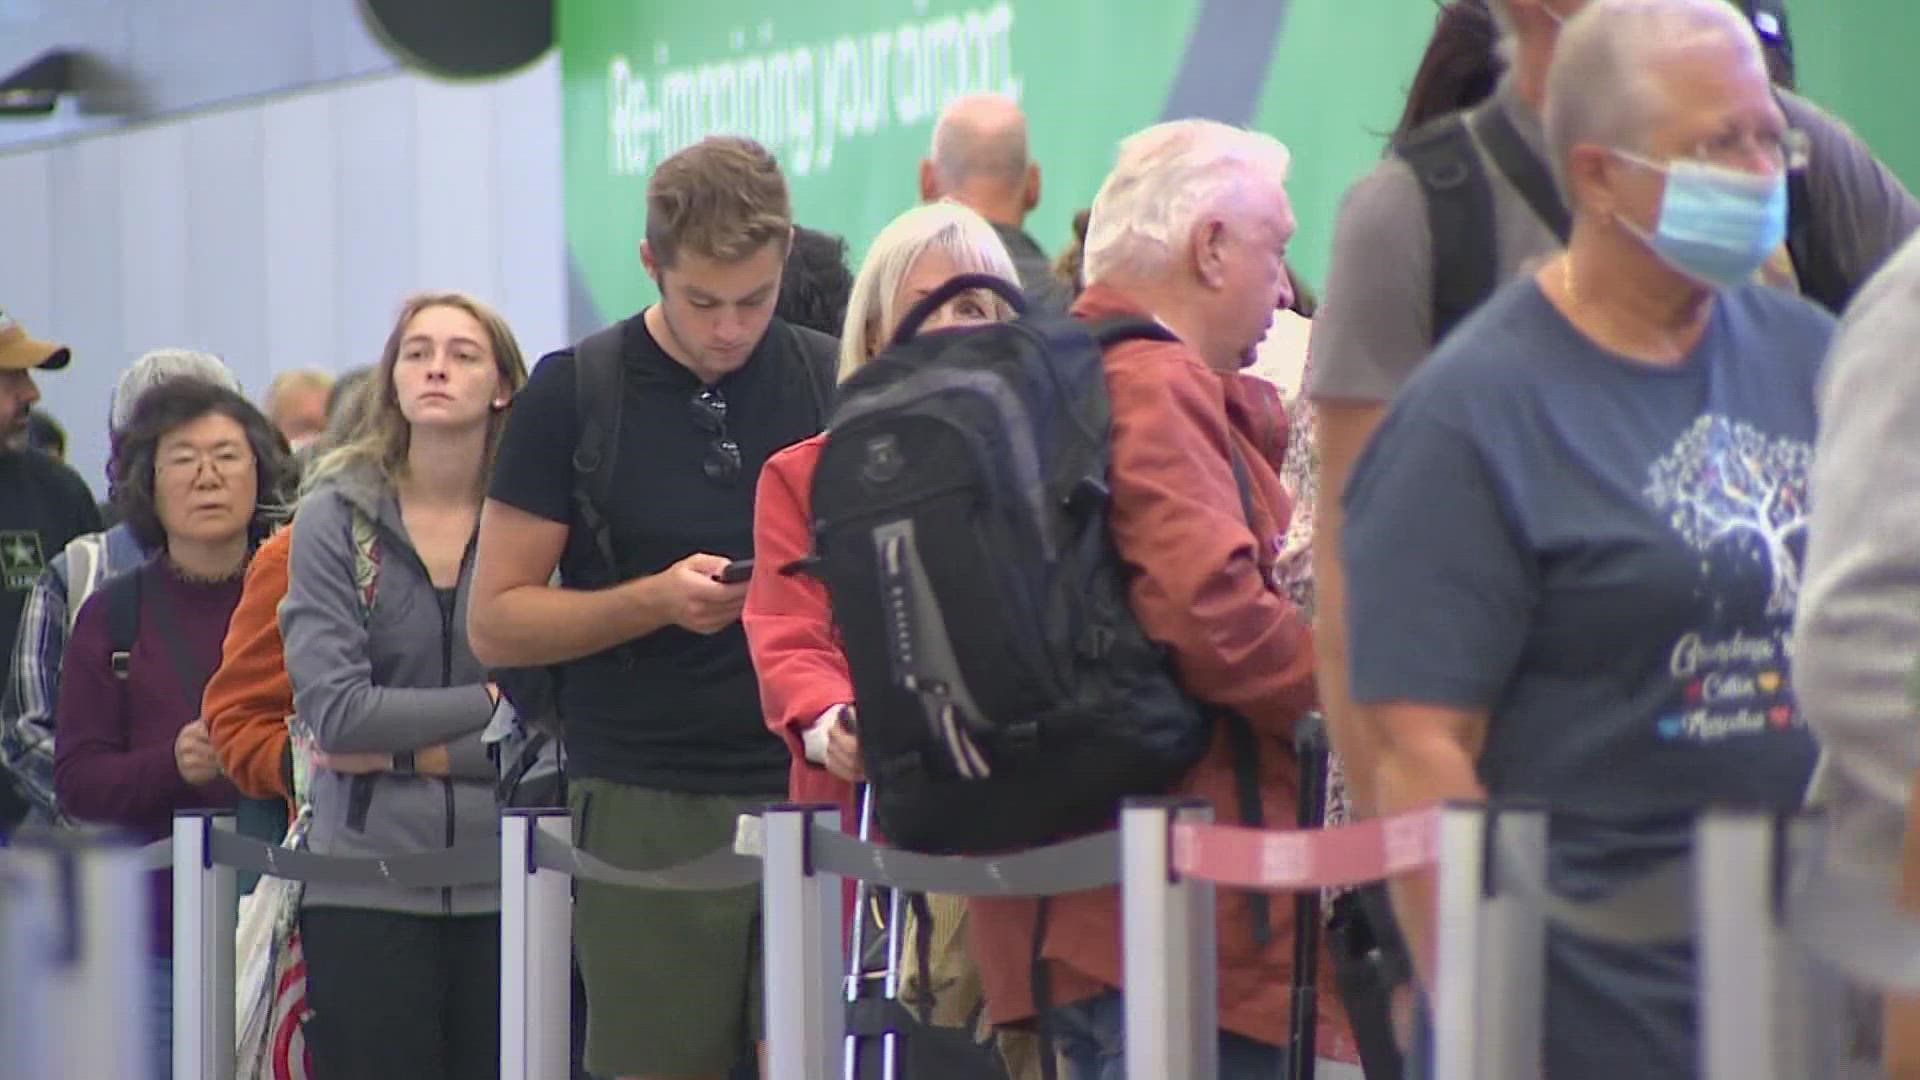 The airport claims the weekend's unusually long wait times were "an unusual event" and they will be adding more staff going forward